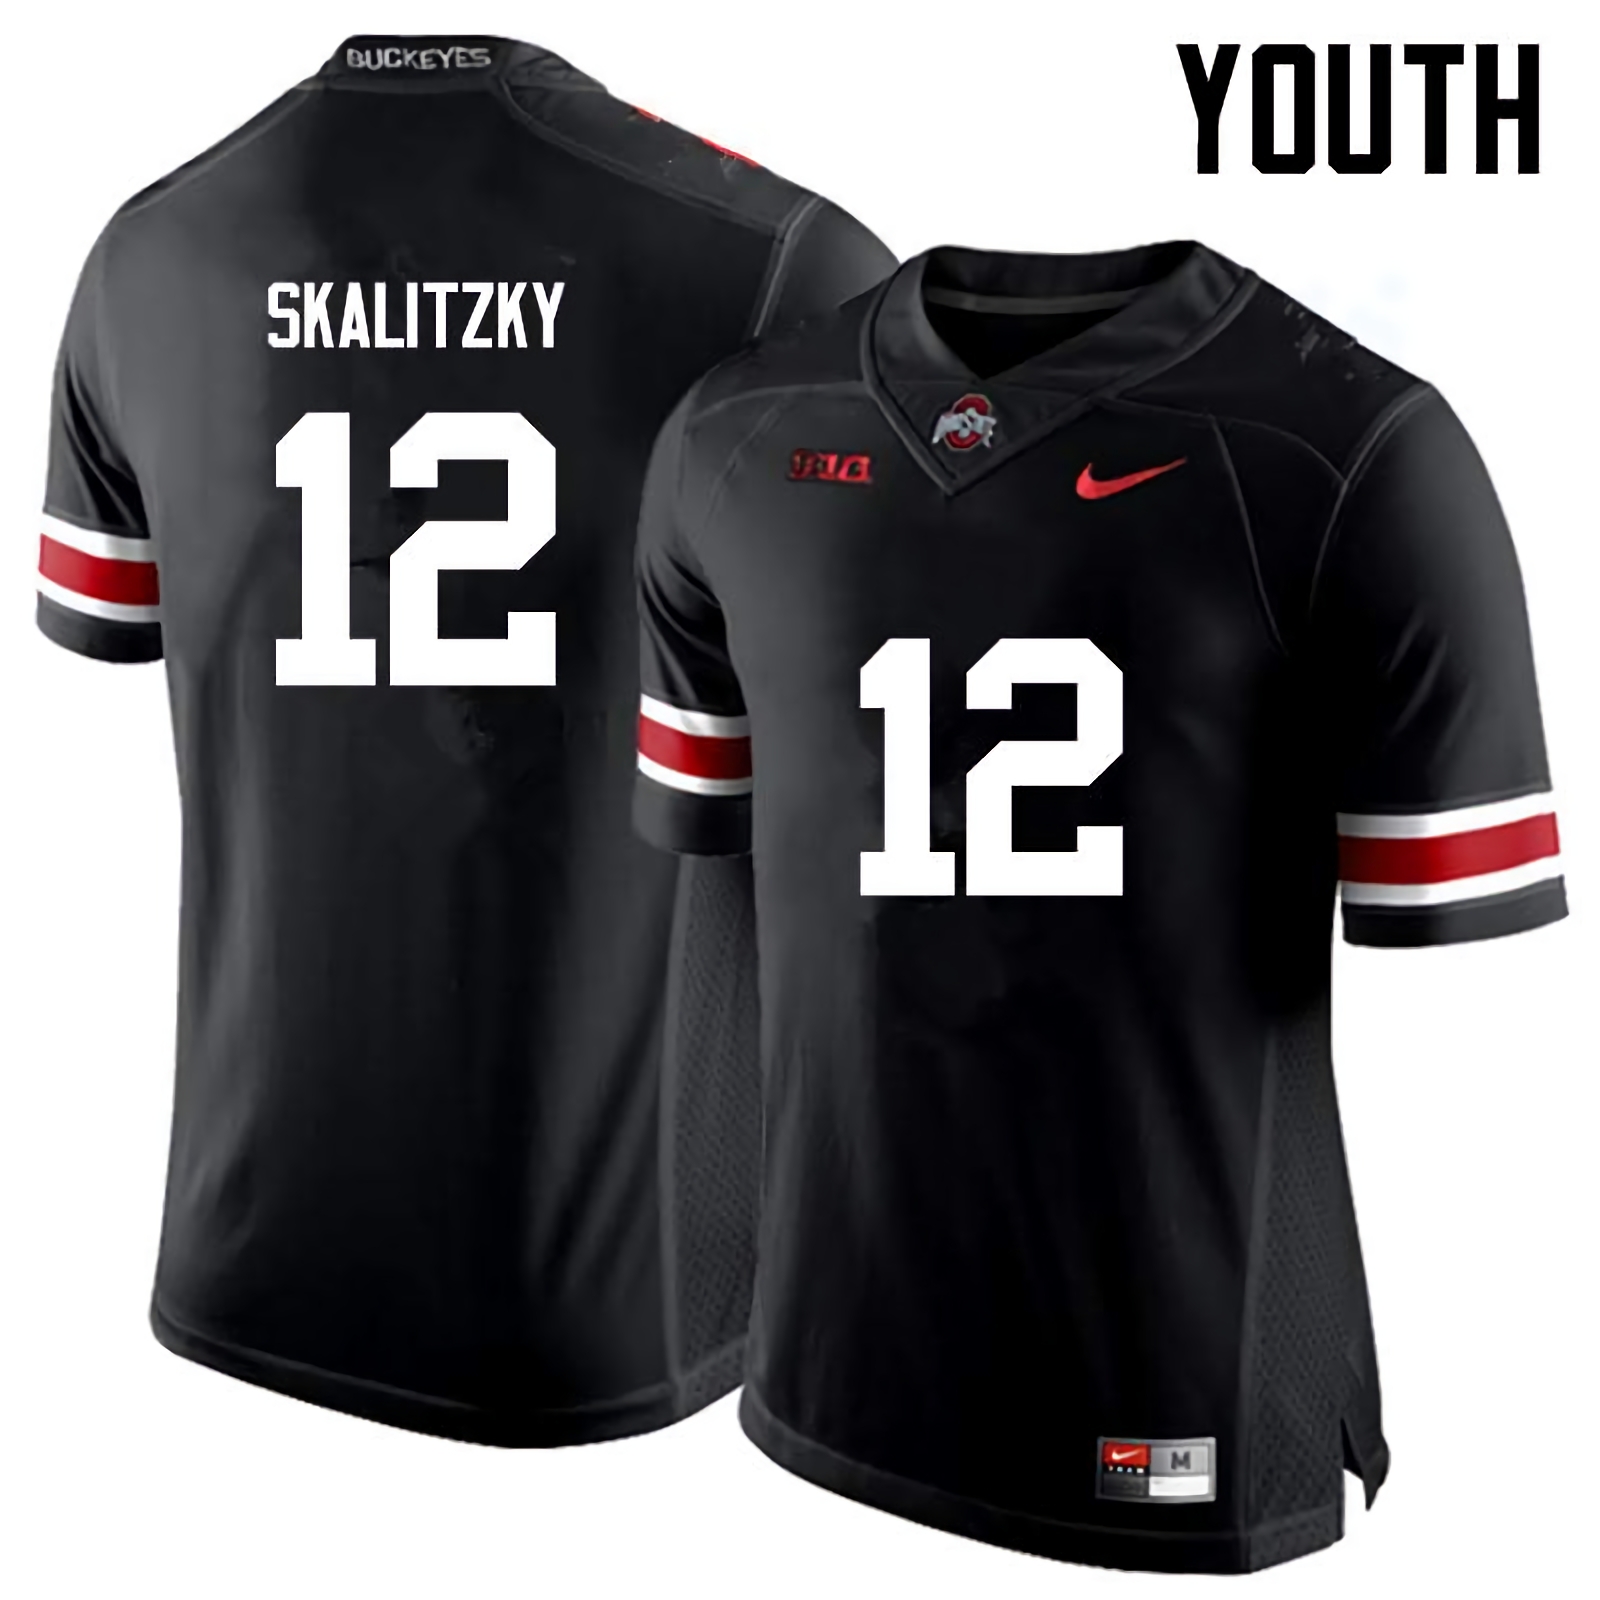 Brendan Skalitzky Ohio State Buckeyes Youth NCAA #12 Nike Black College Stitched Football Jersey OBT5656YK